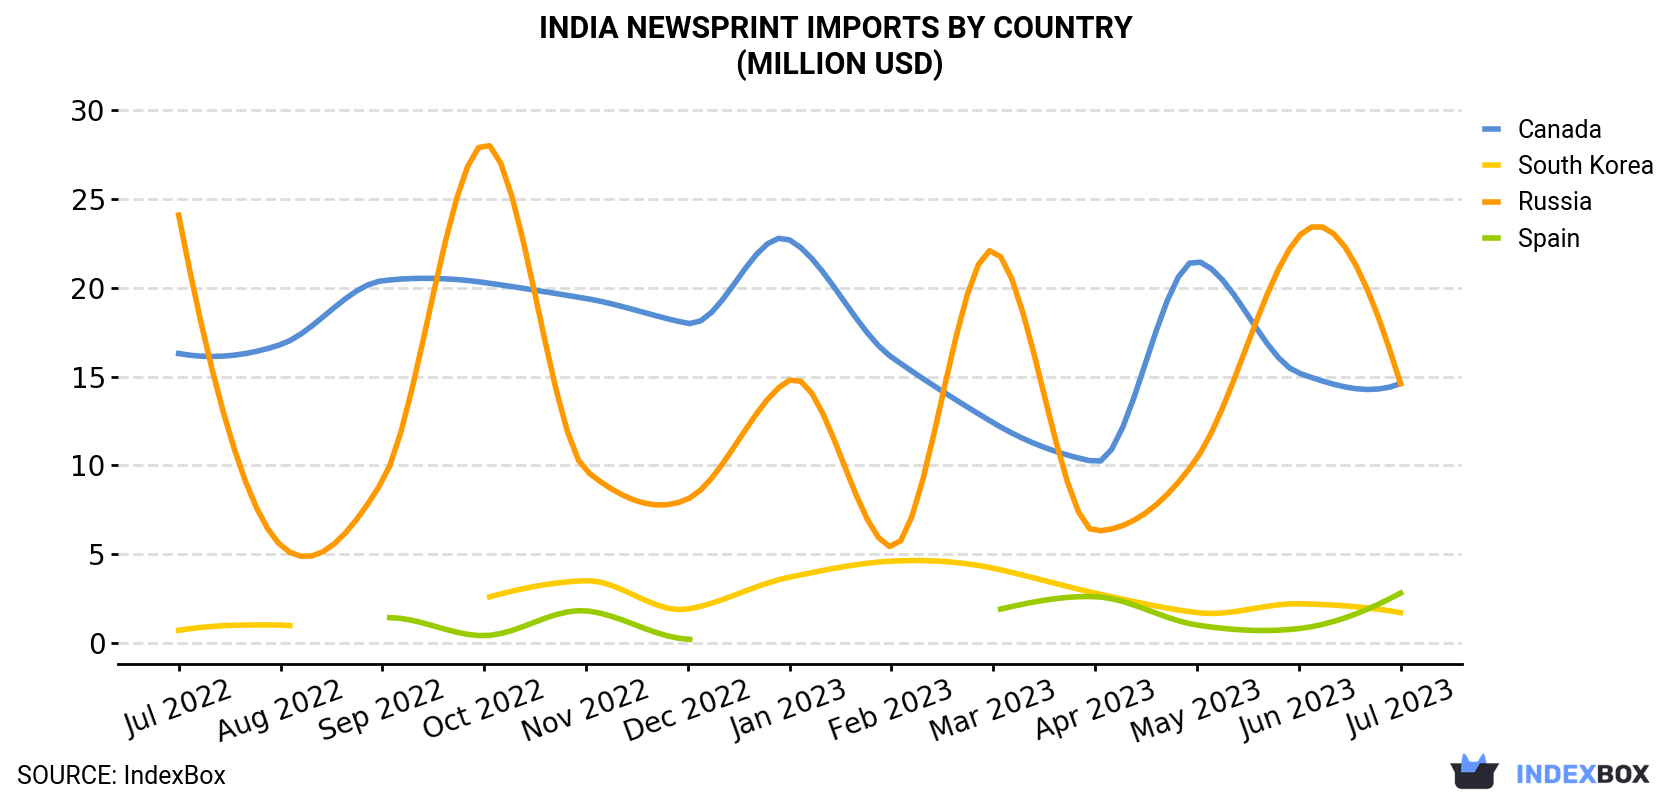 India Newsprint Imports By Country (Million USD)